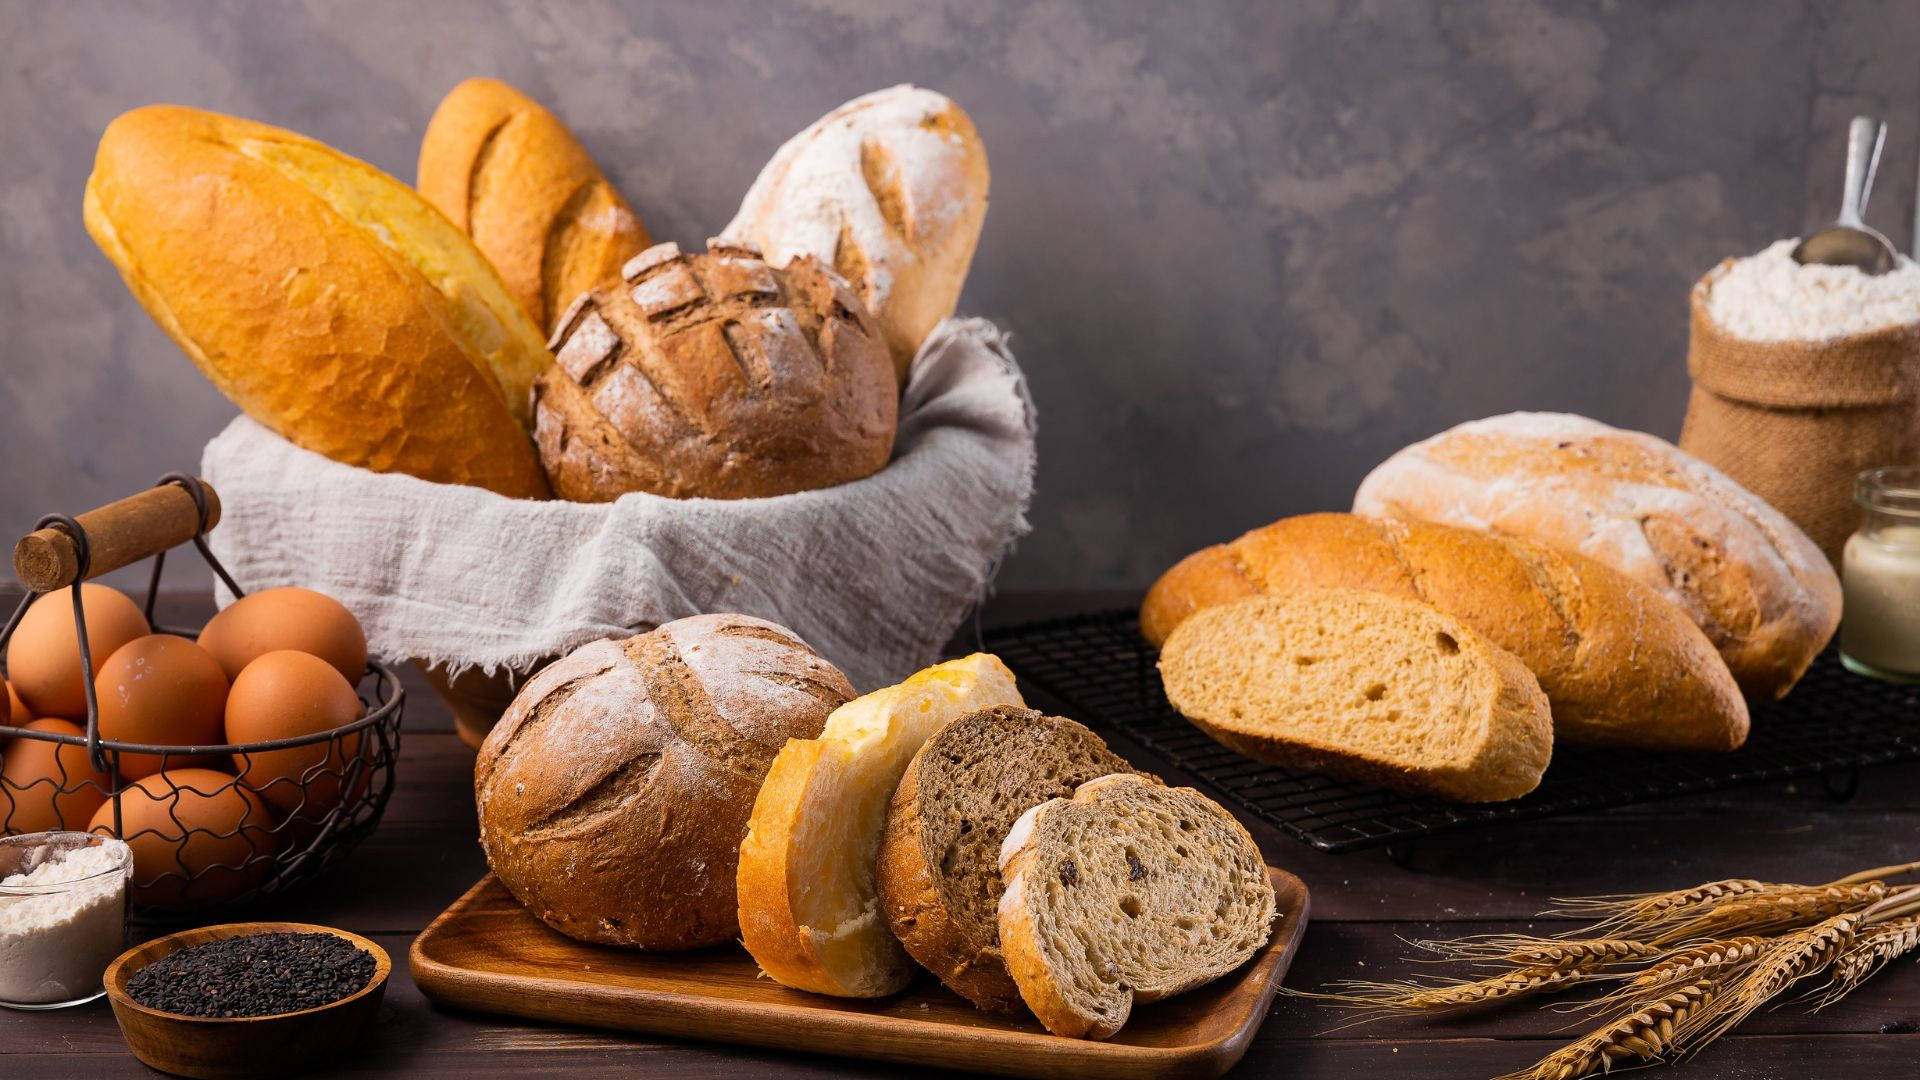 Download Breads With Eggs, Flour, And Wheat Wallpaper